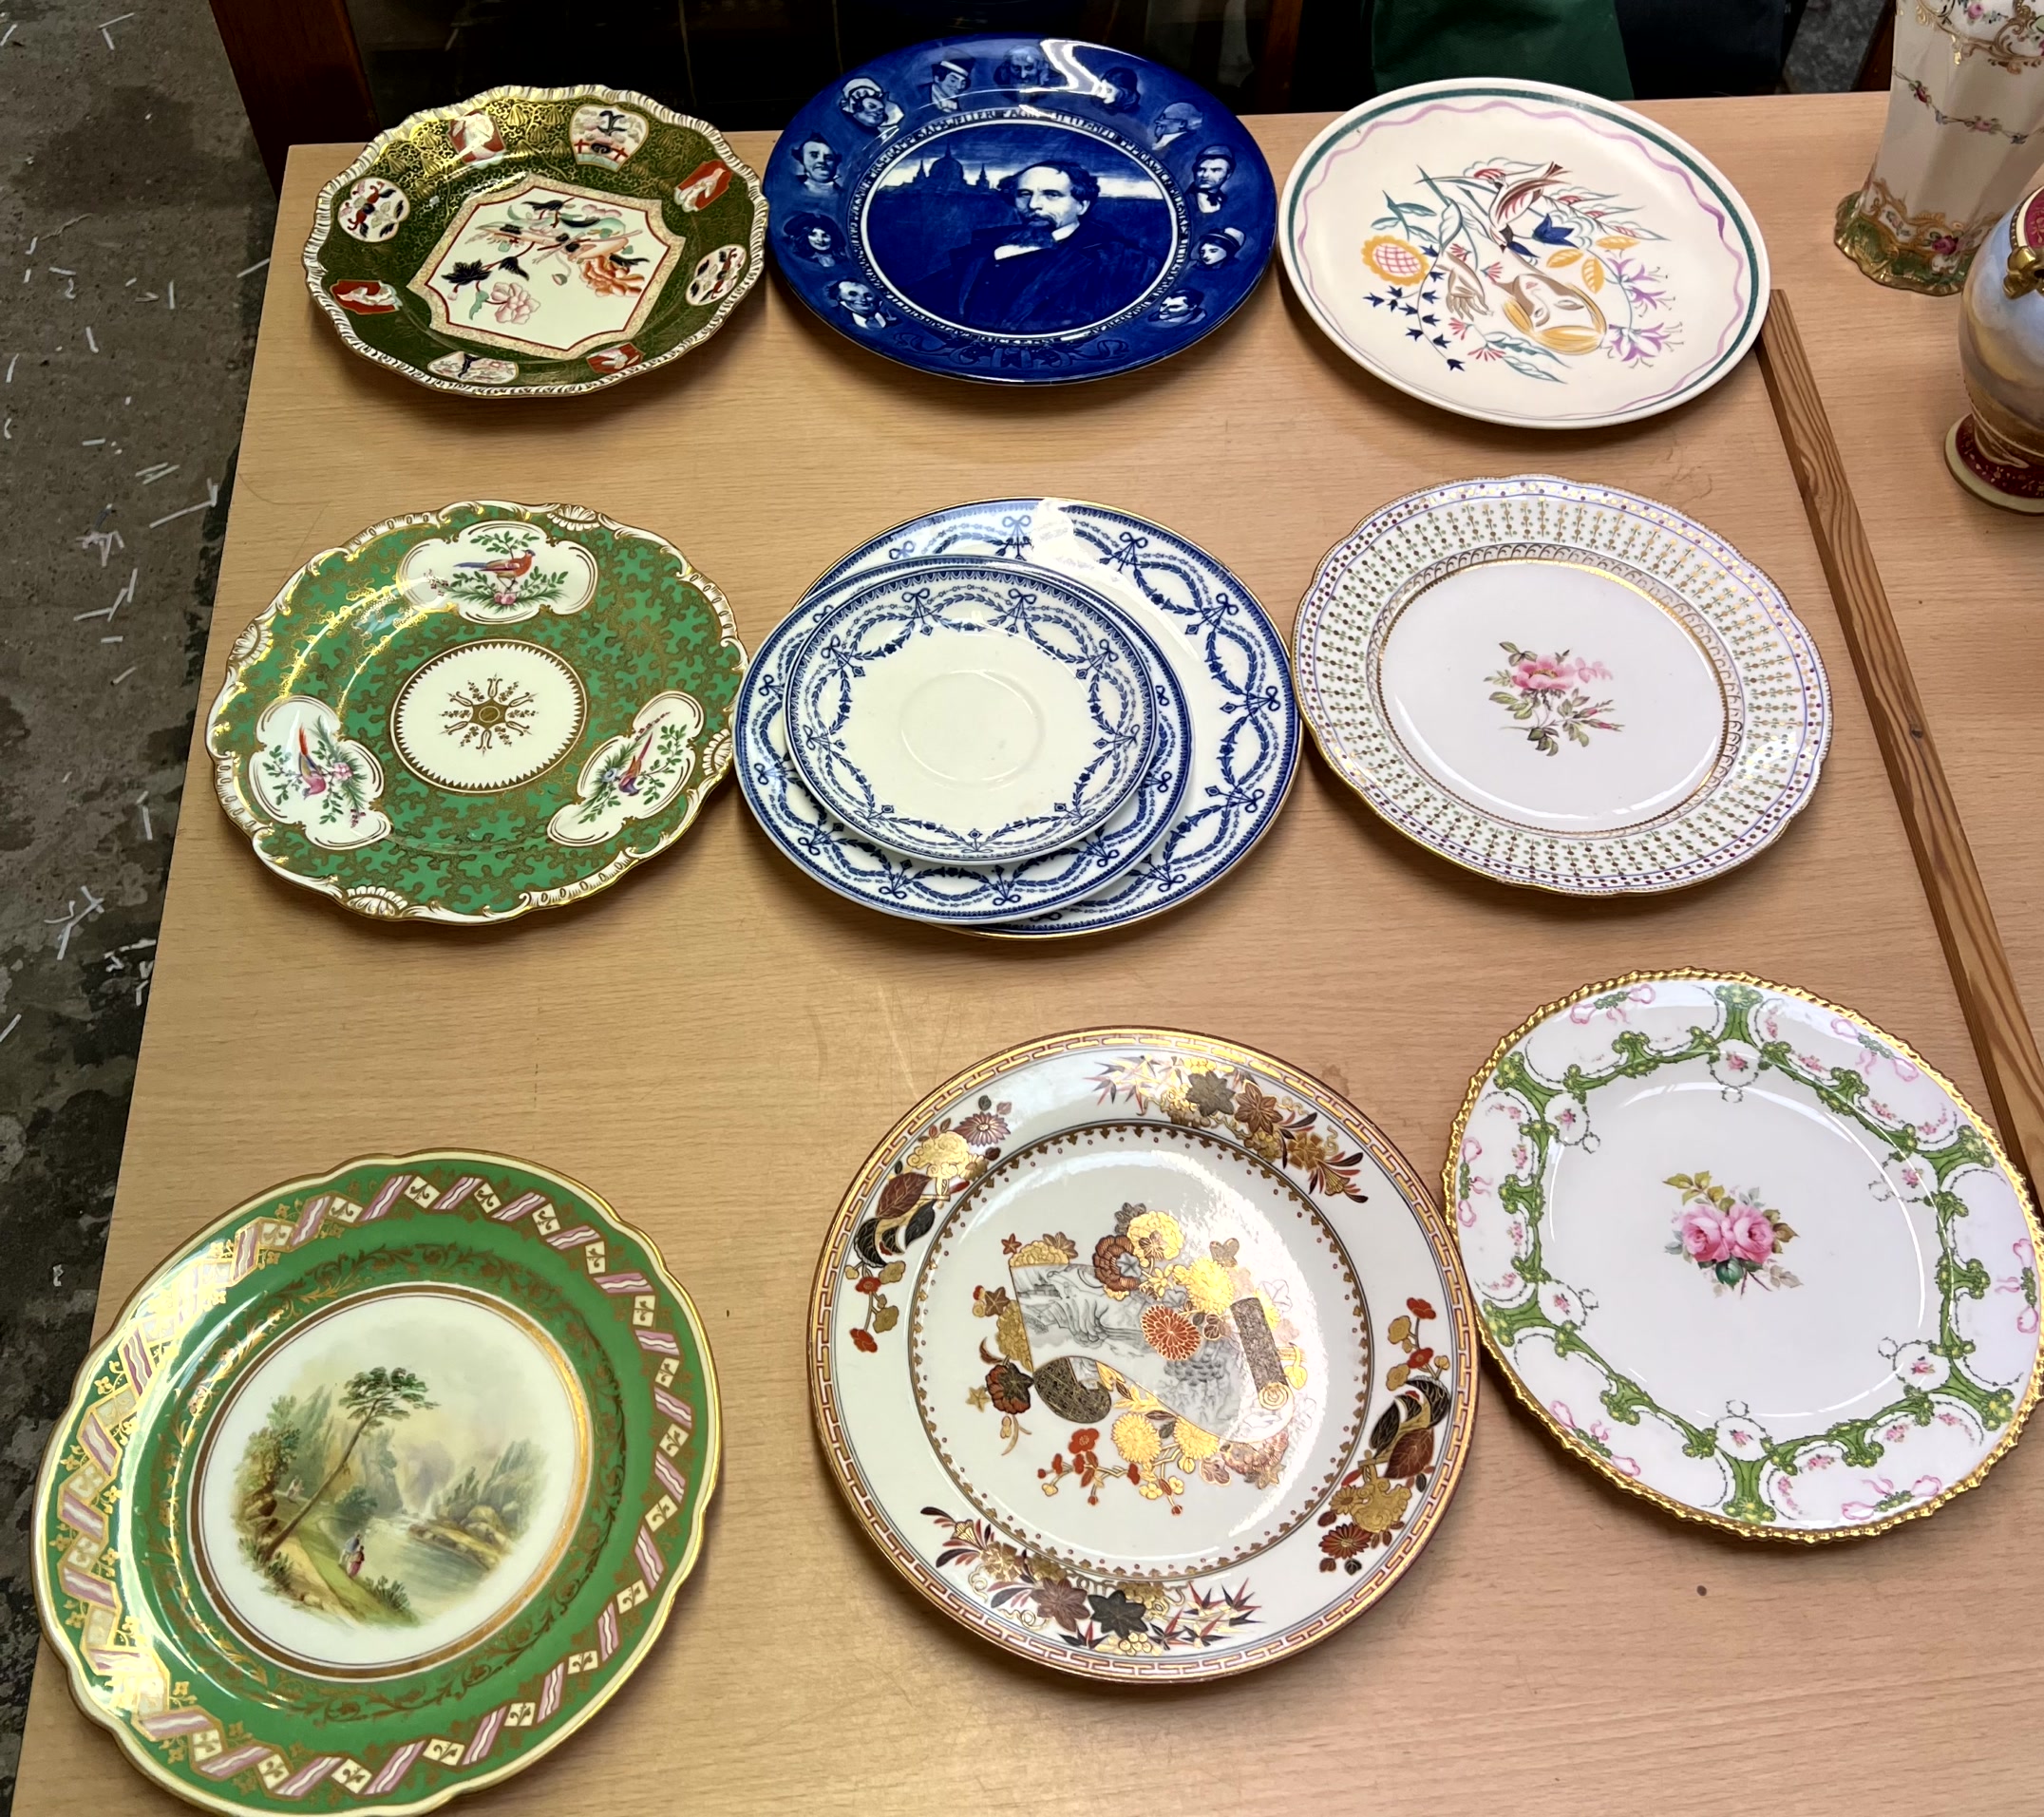 A Flight Barr & Barr plate together with floral painted plates,